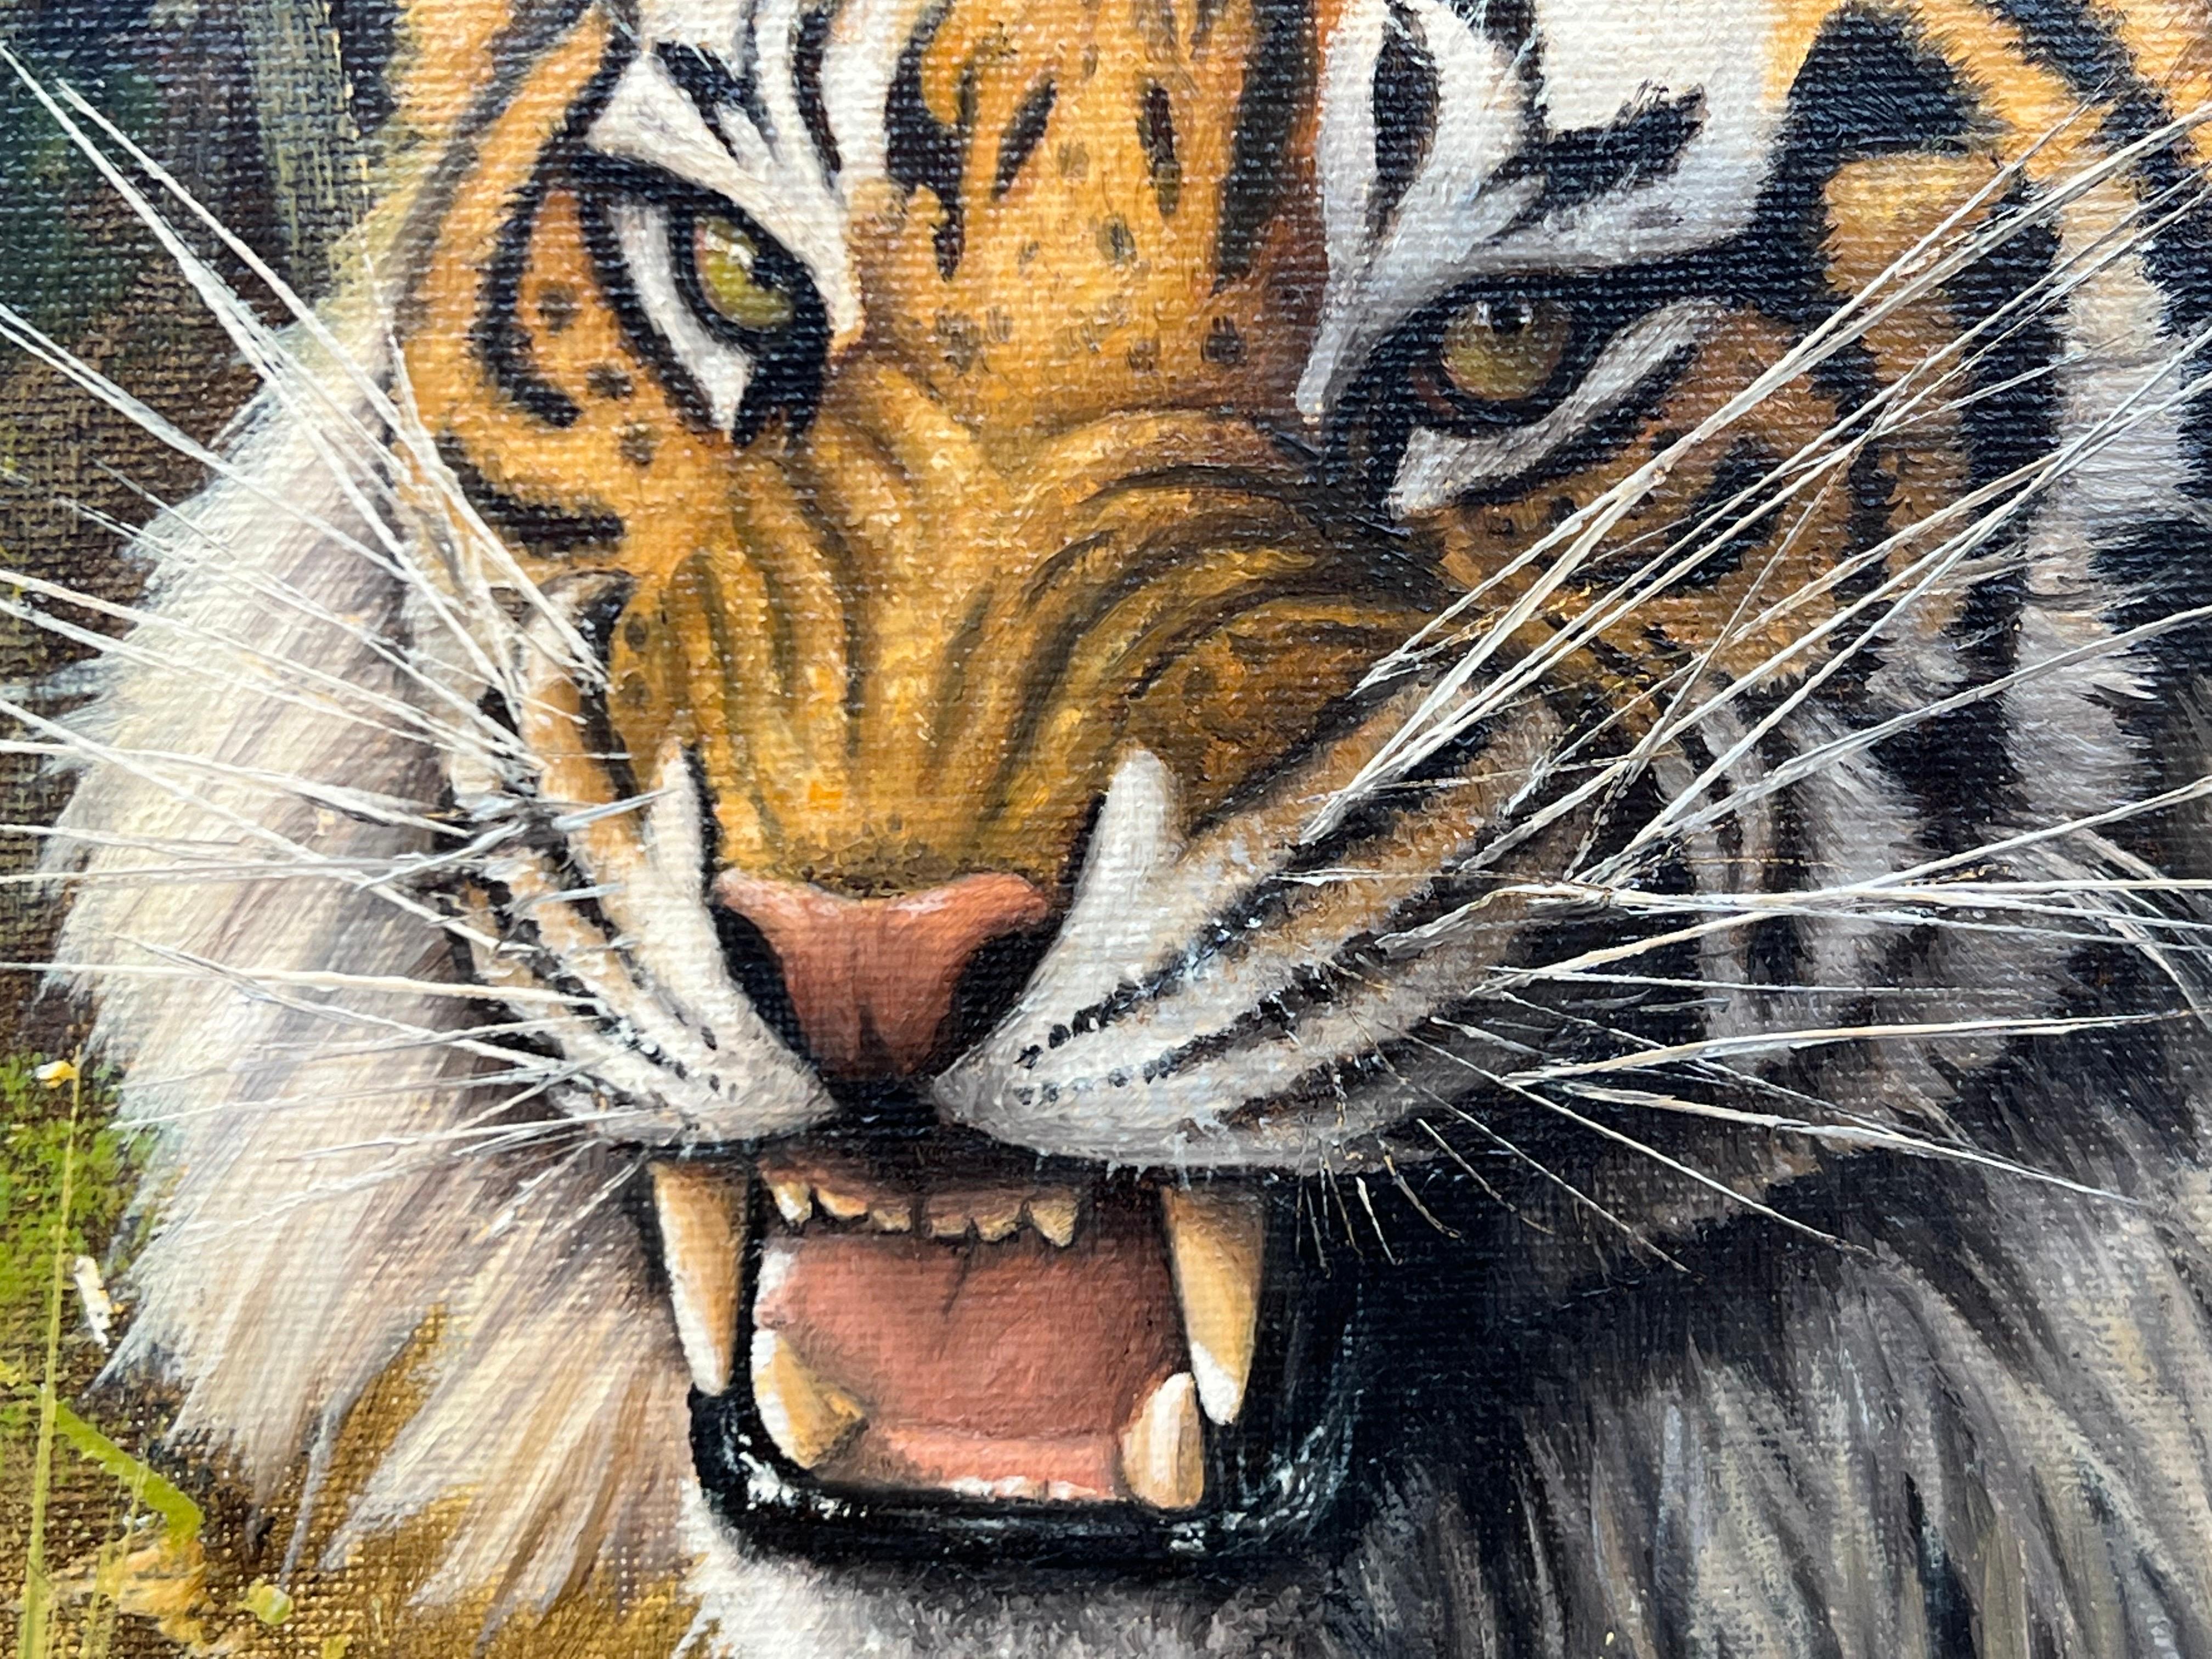 Original Oil Painting of Tiger in the Wild by British Contemporary Artist 3